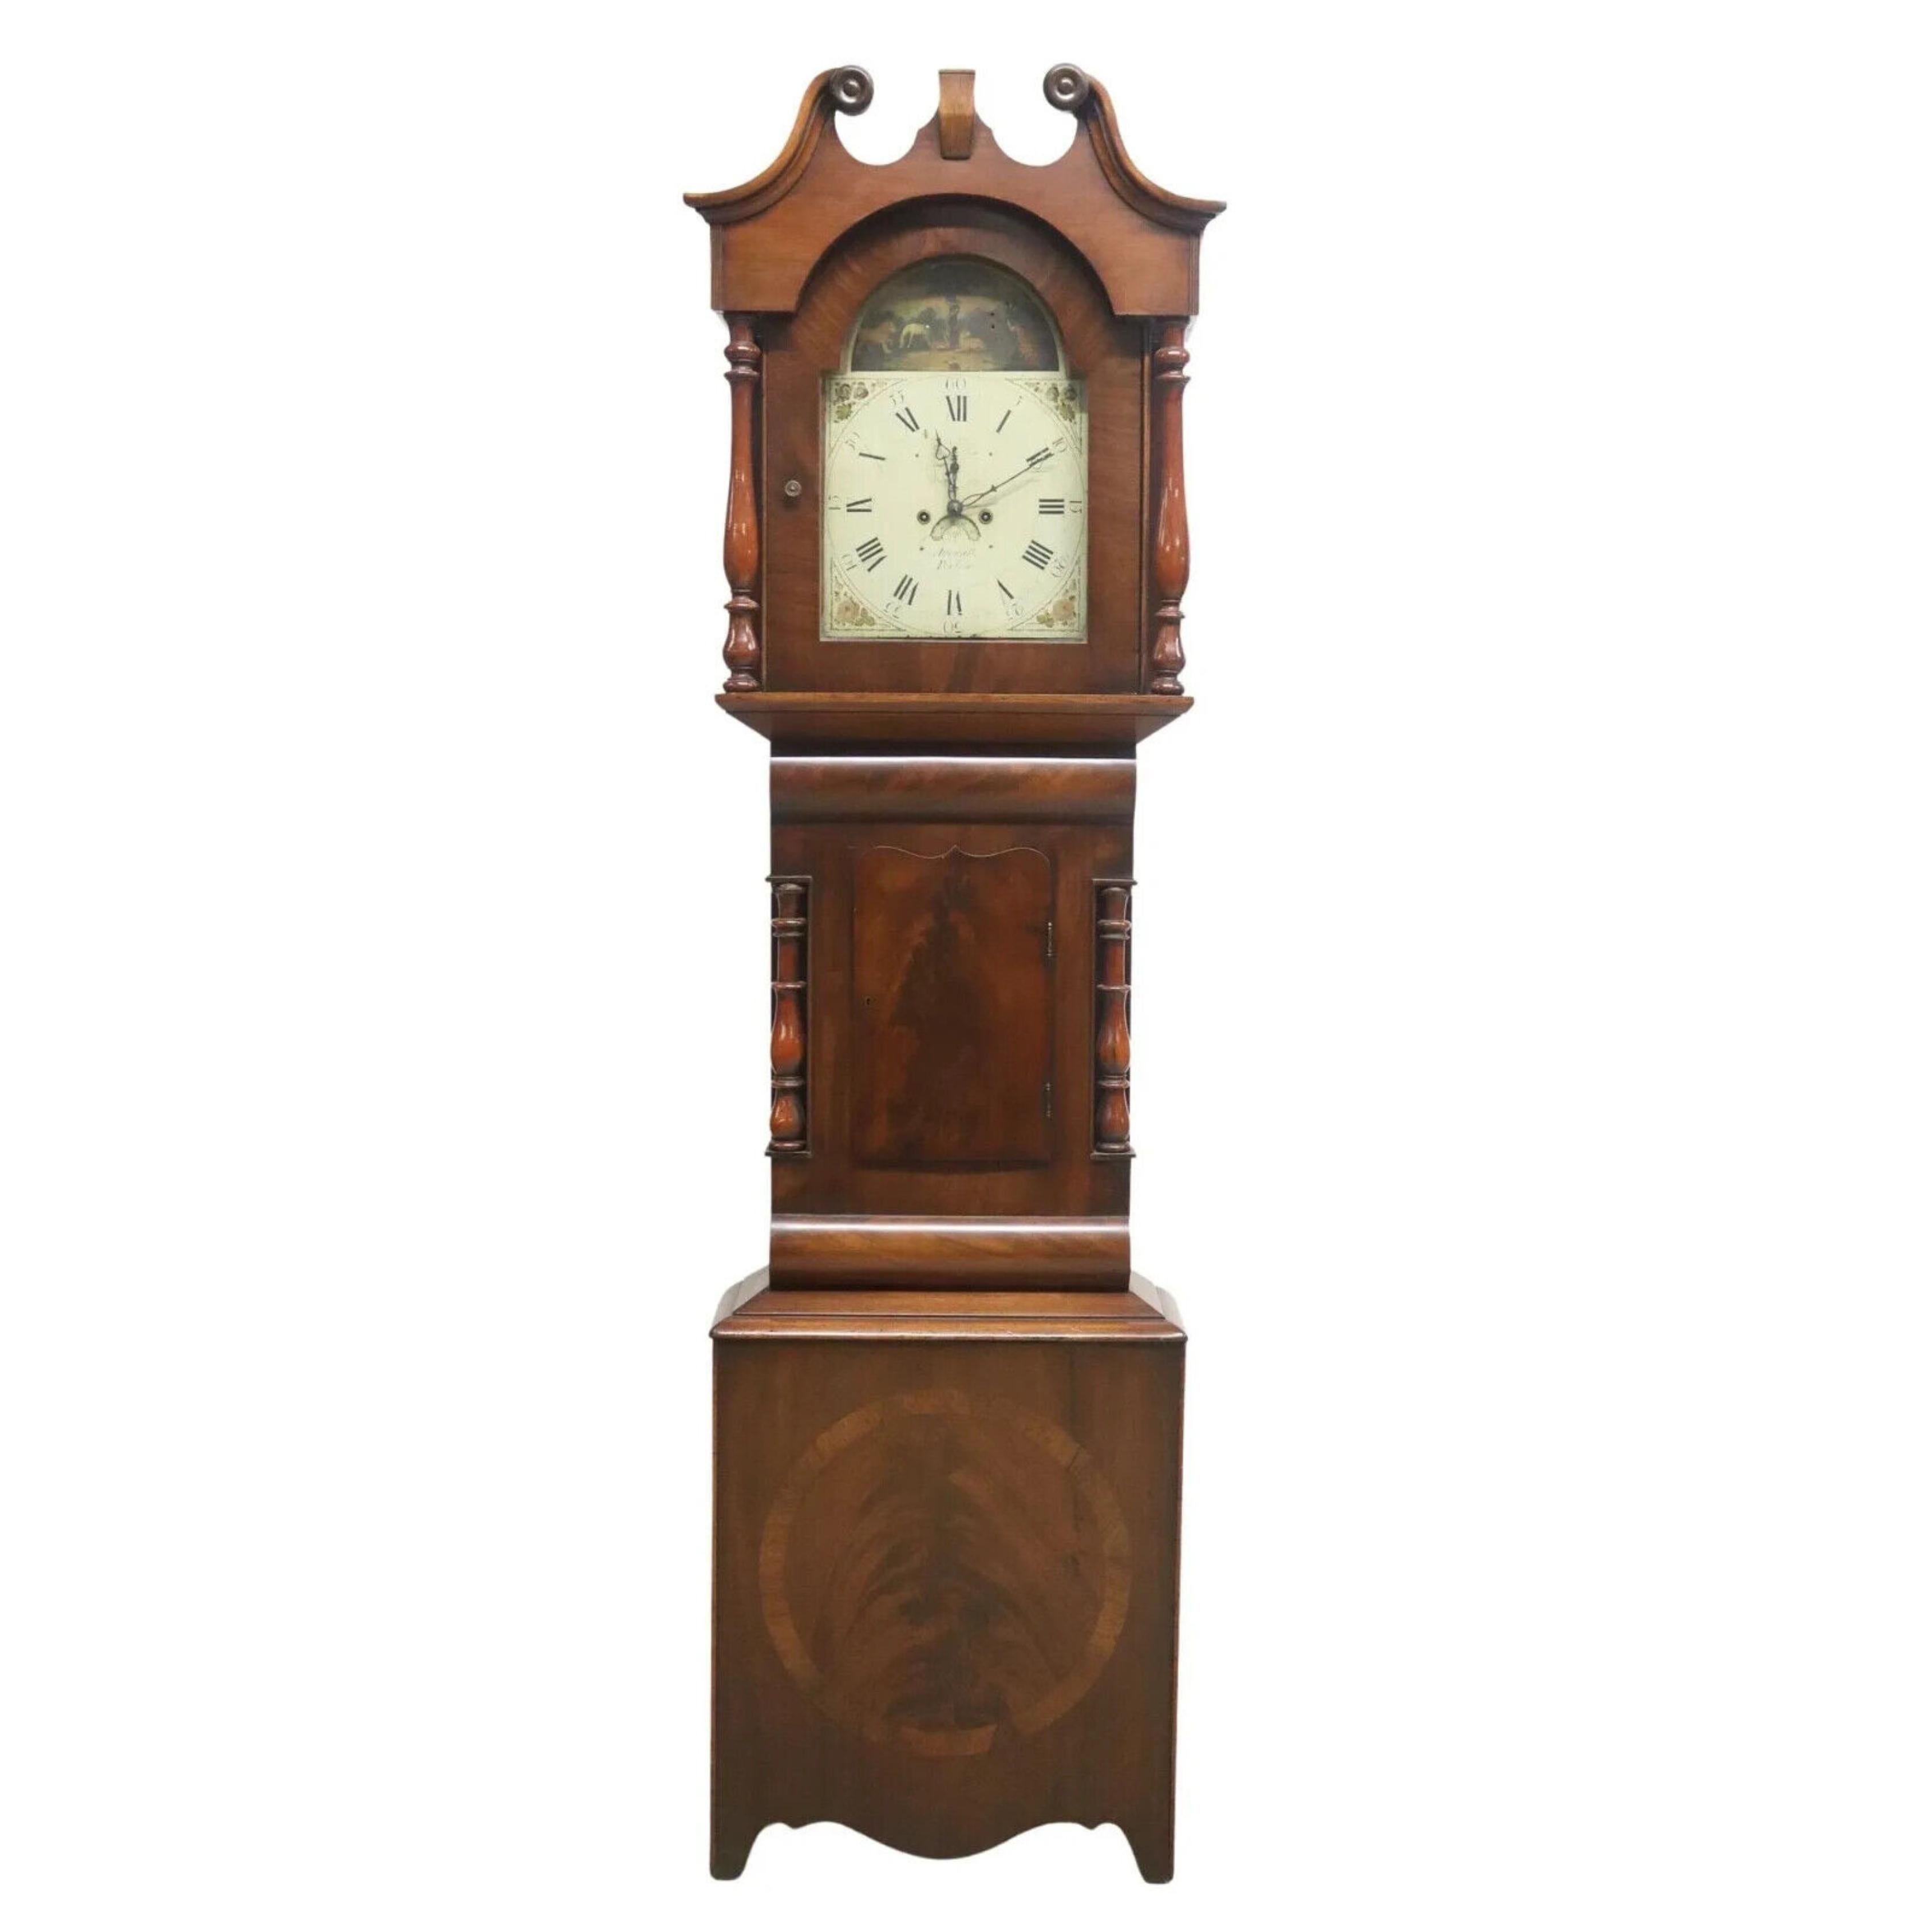 Stunning Antique Clock, Longcase, English William IV Mahogany Striking, Early 19th Century, 1800s!!

English William IV mahogany longcase clock, first half 19th c., glazed hood with swan-neck pediment, turned columns, housing a painted dial